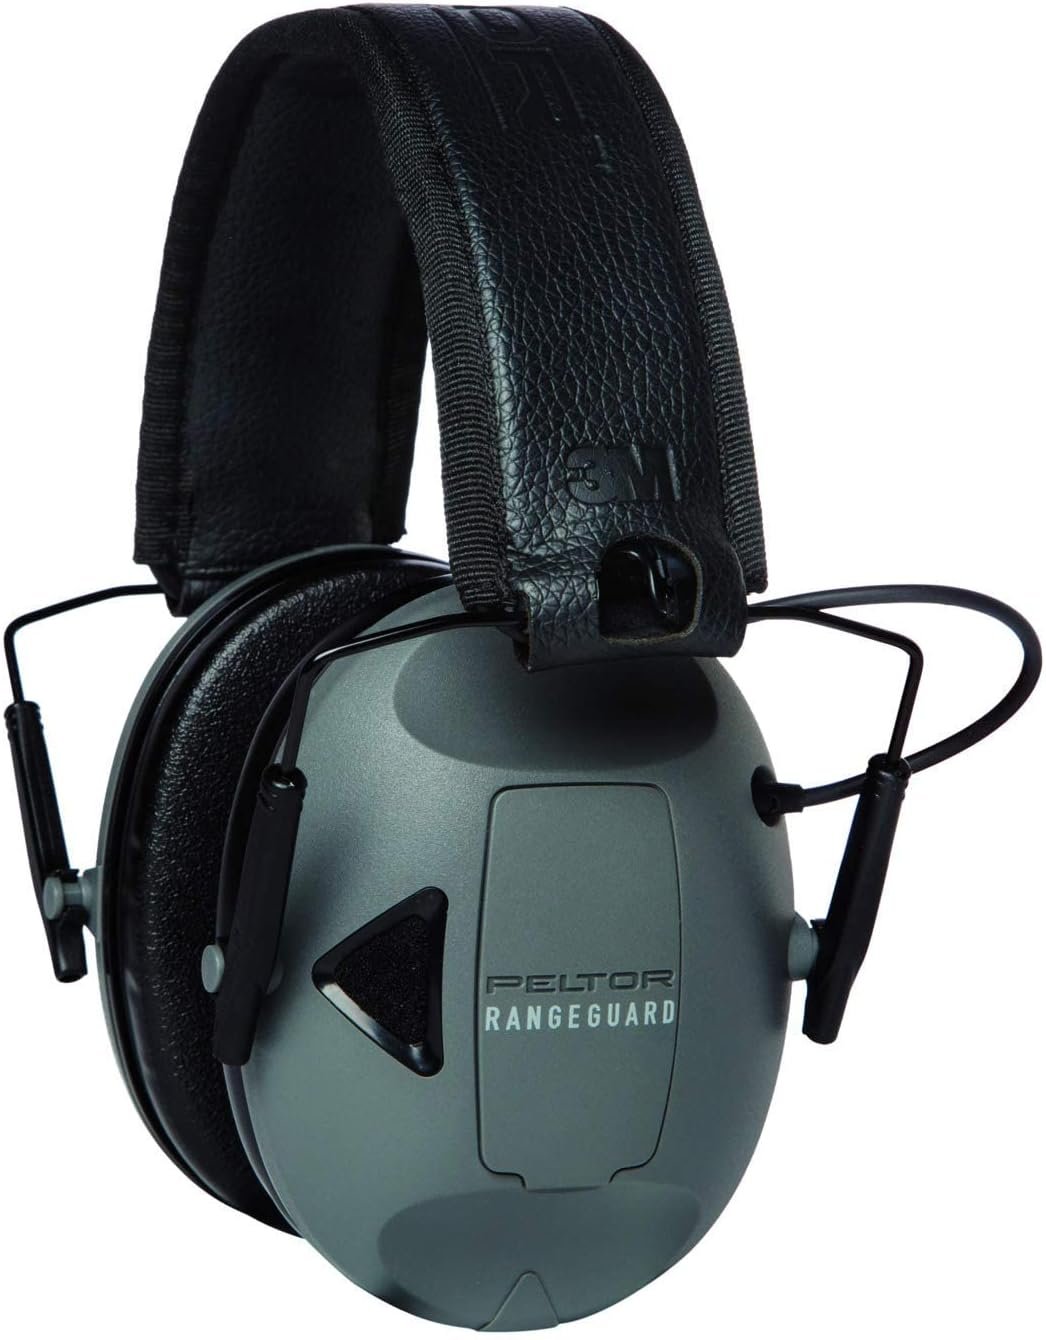 Peltor Sport RangeGuard Electronic Hearing Protector Review